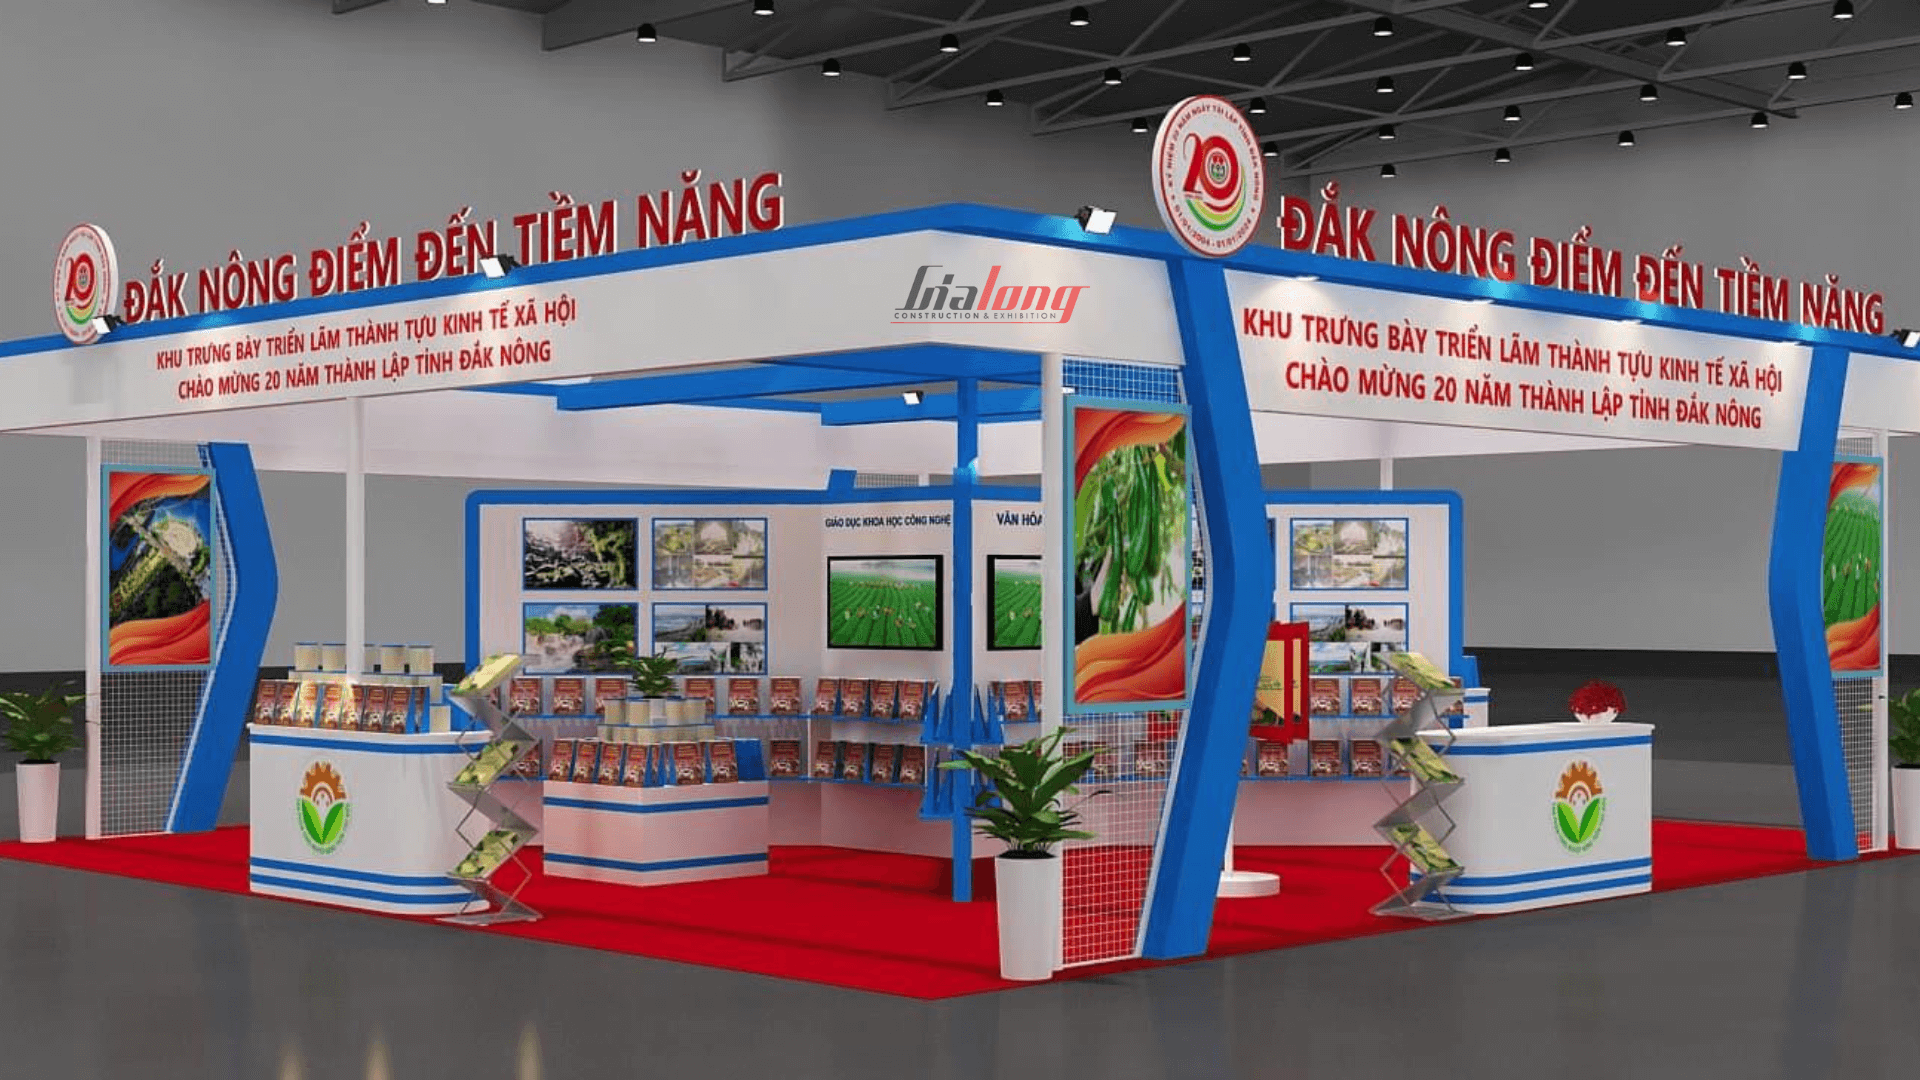 The exhibition booth was designed and constructed by Gia Long